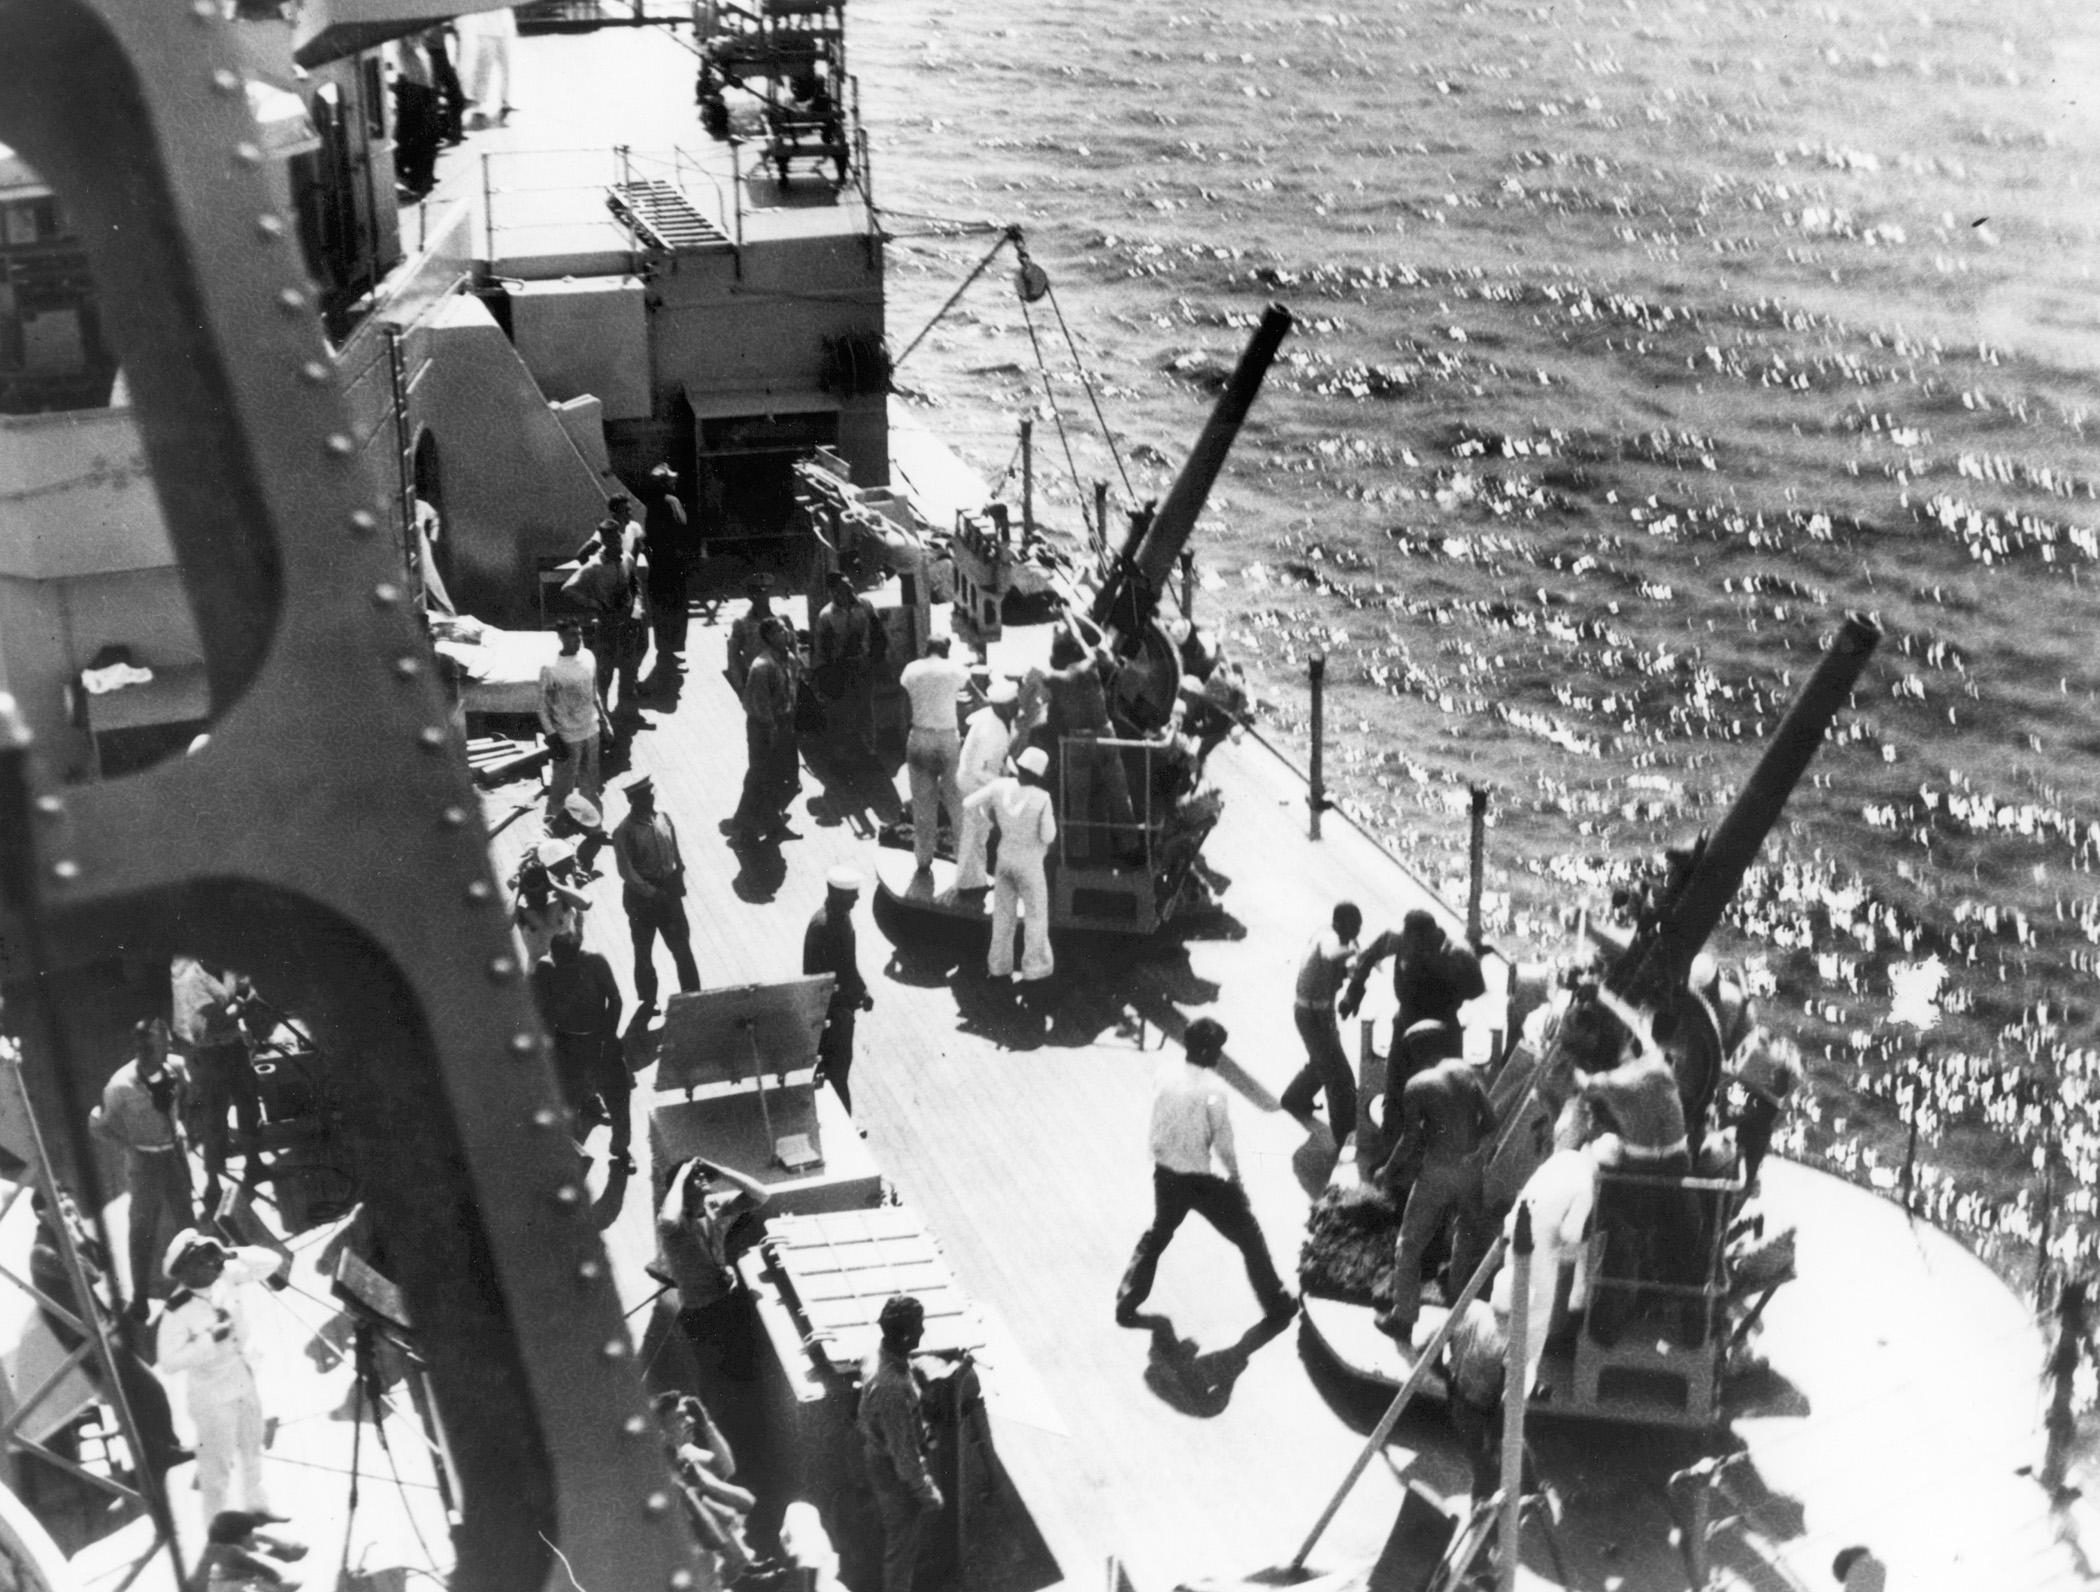 Crewmen of the USS Houston man antiaircraft guns while others scan the sky for planes off the Chinese coast near Chefoo in 1932-33.